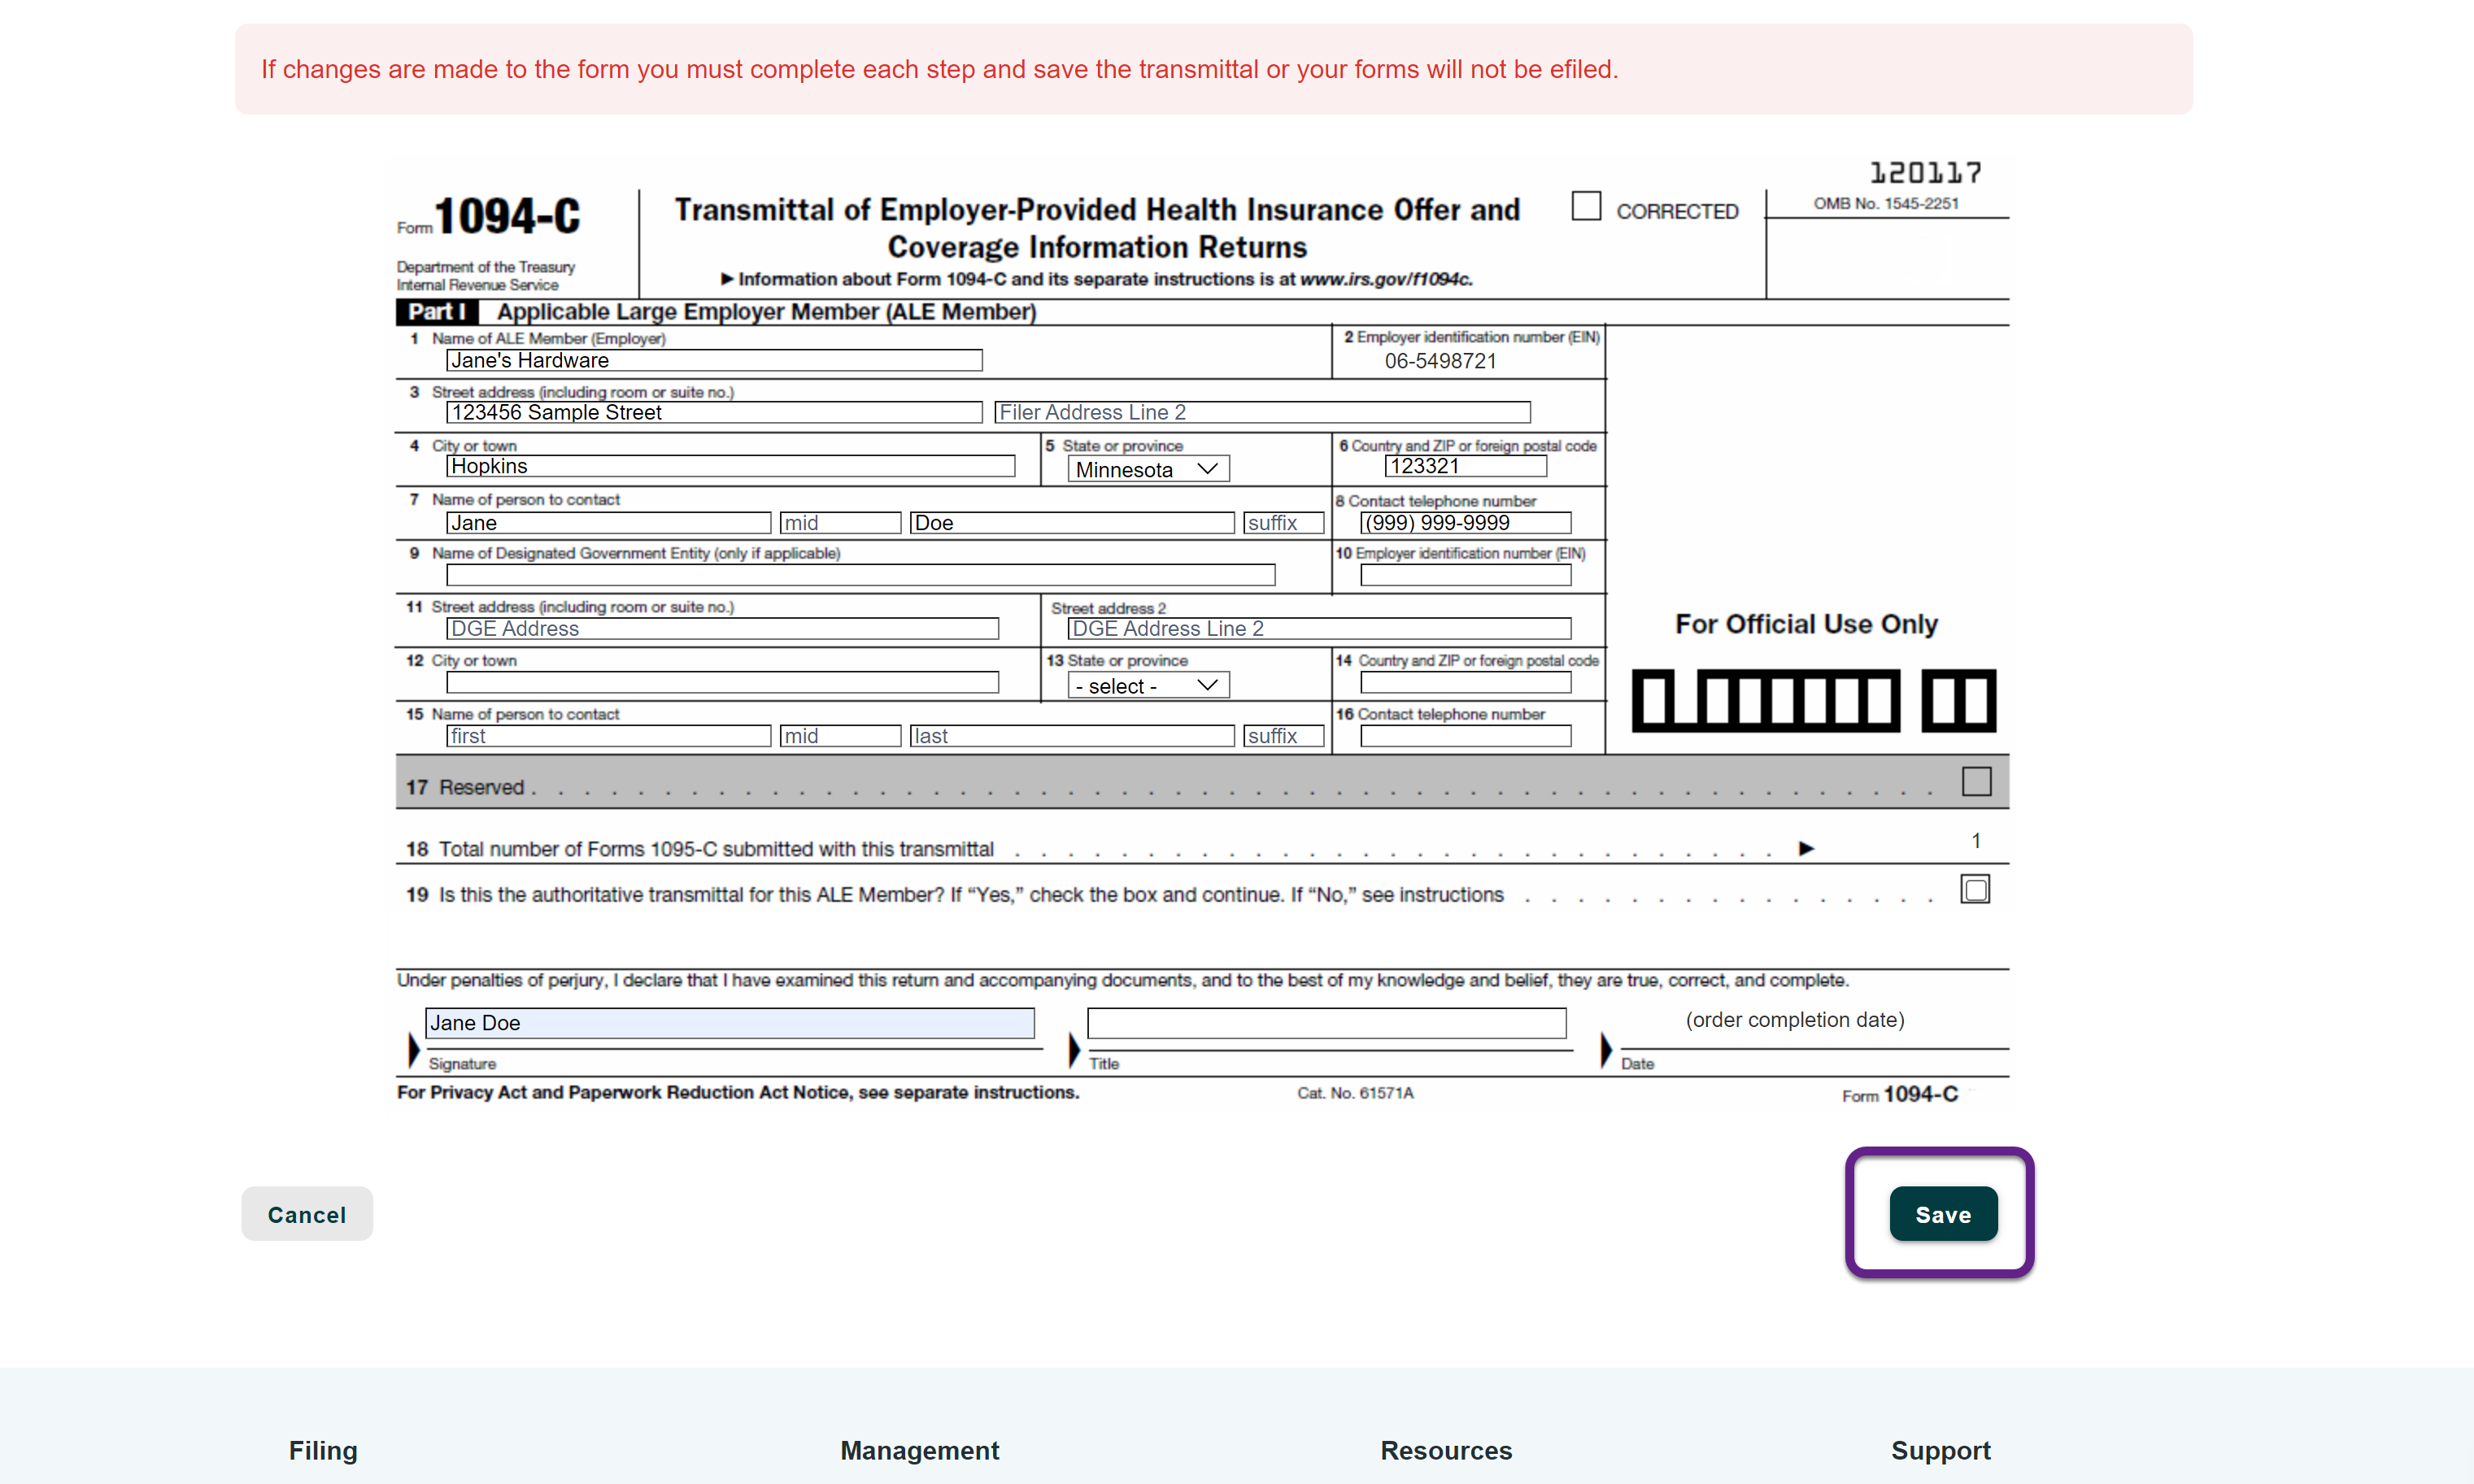 Image of a 1094-C form with a callout on the Save button.